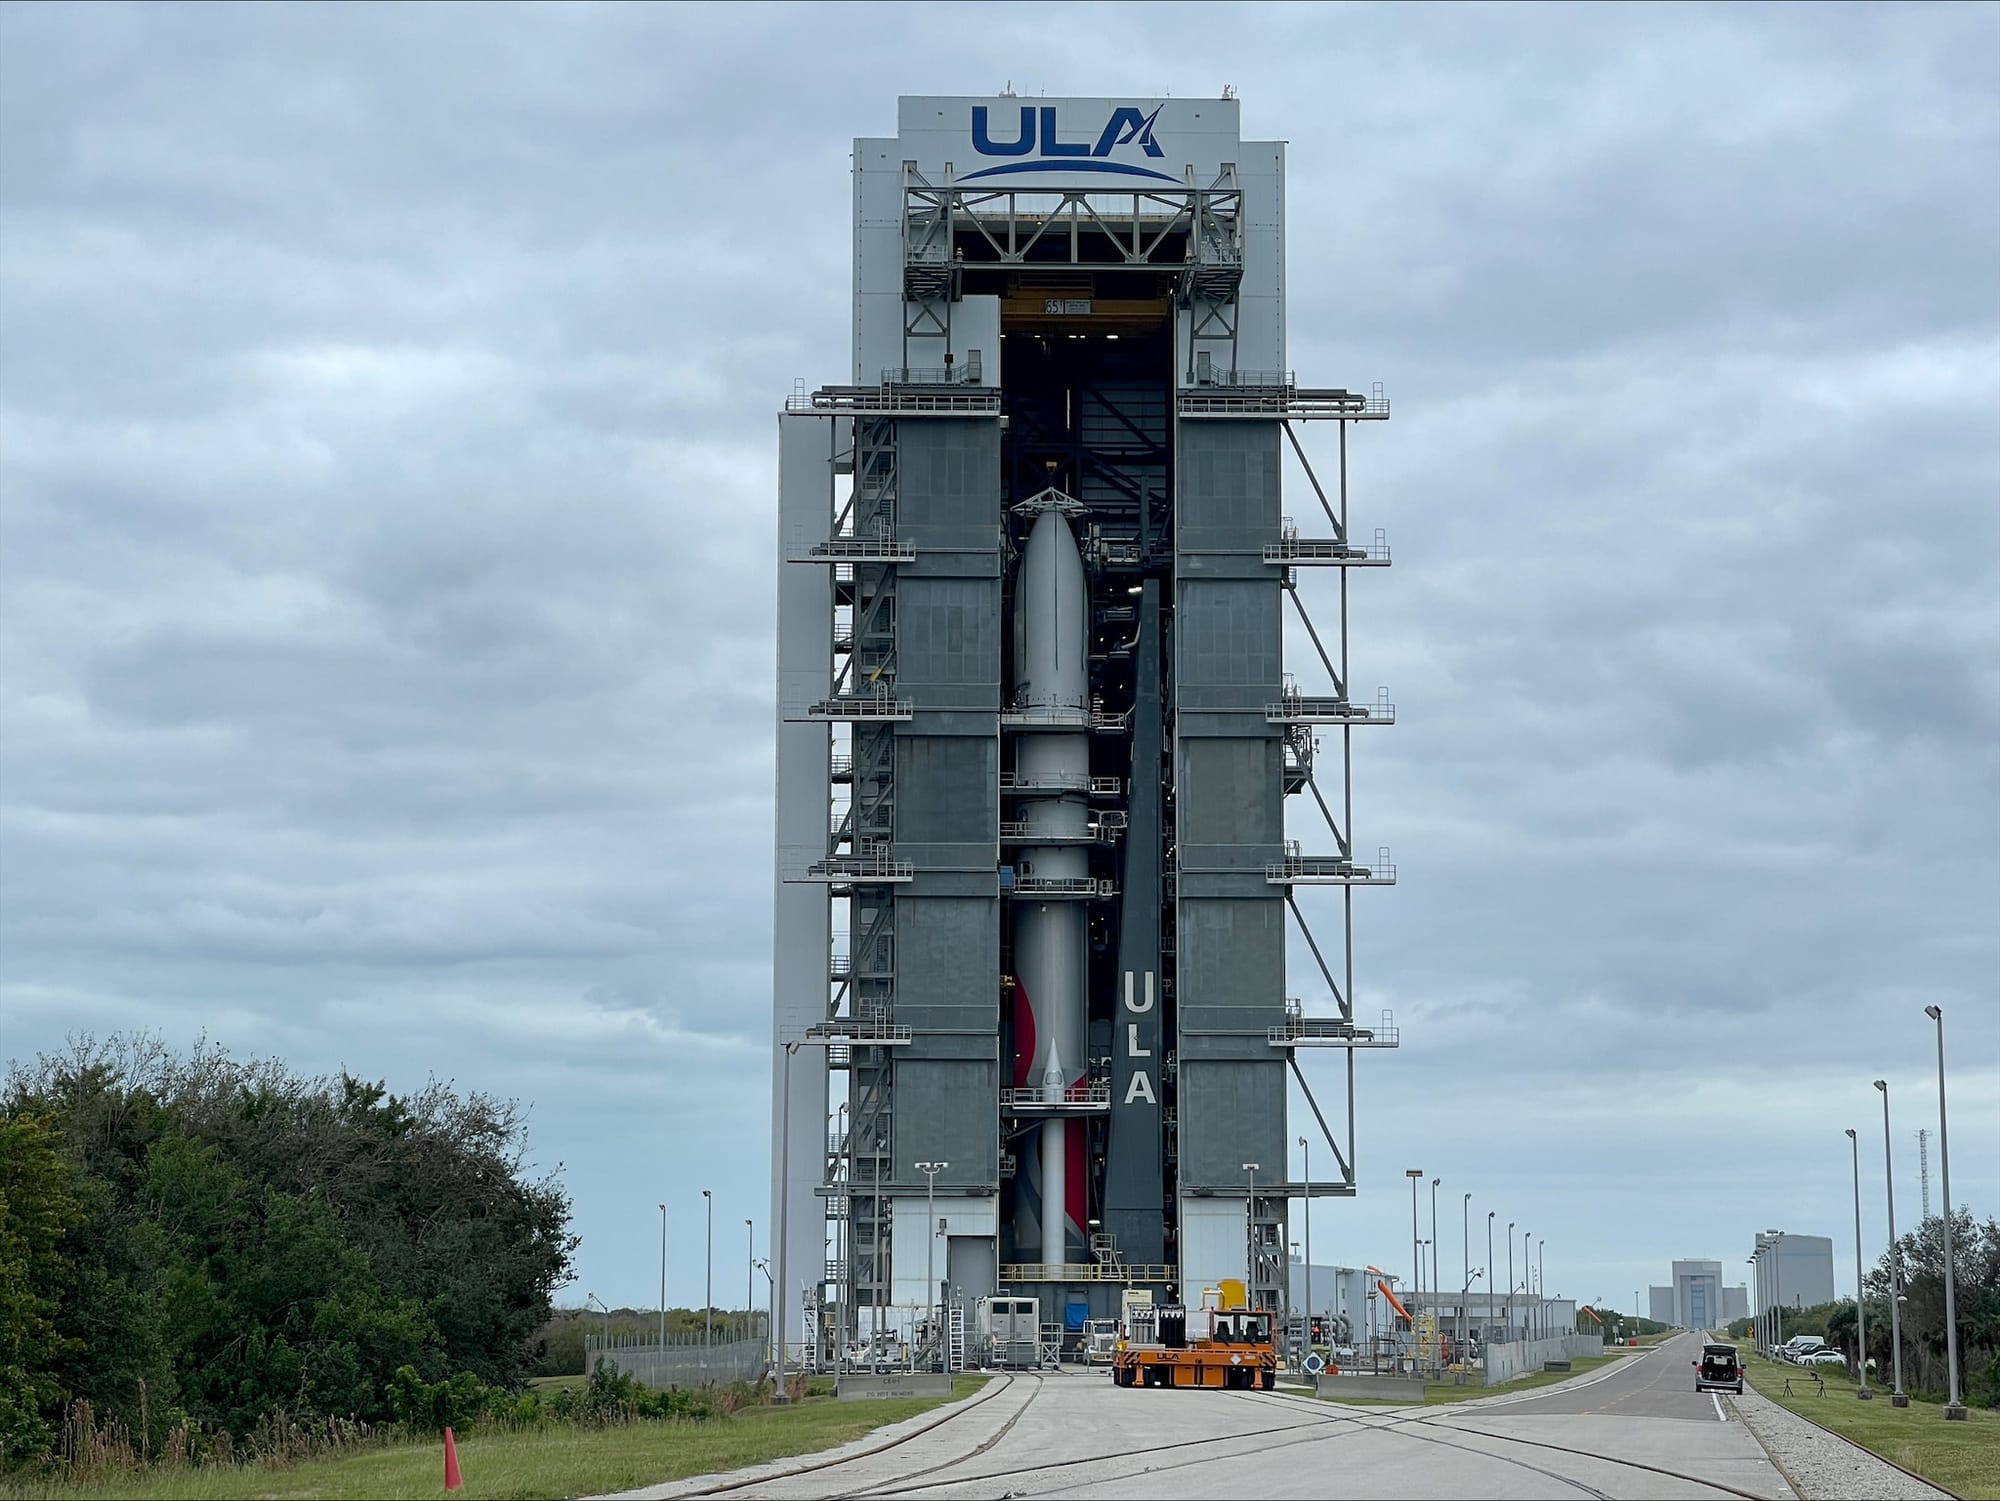 Vulcan during payload mate to the rocket. ©United Launch Alliance